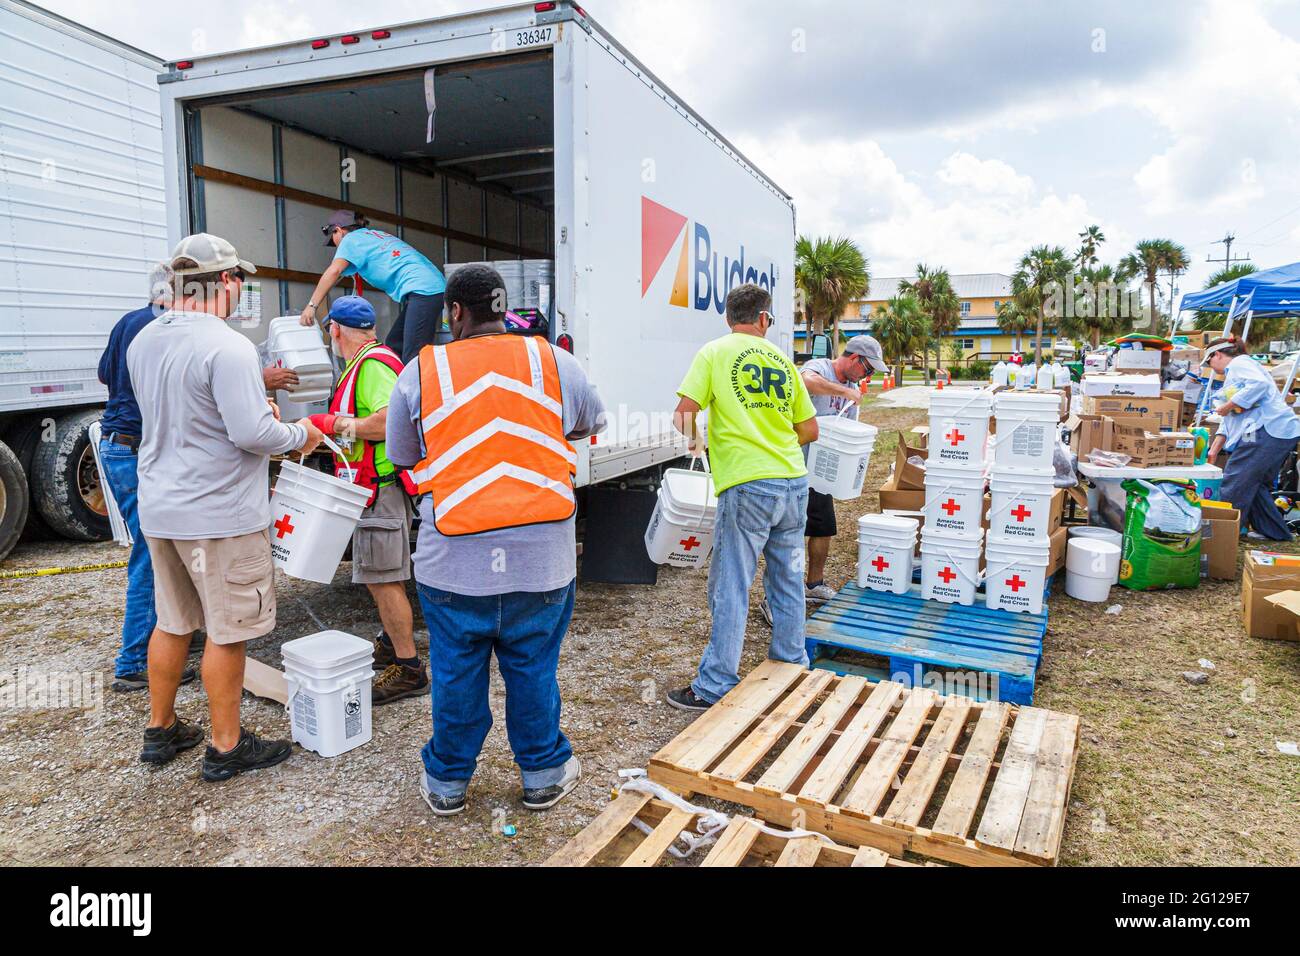 Florida FL South Everglades City after Hurricane Irma response recovery assistance distribution site Red Cross workers volunteer volunteers Photo Alamy